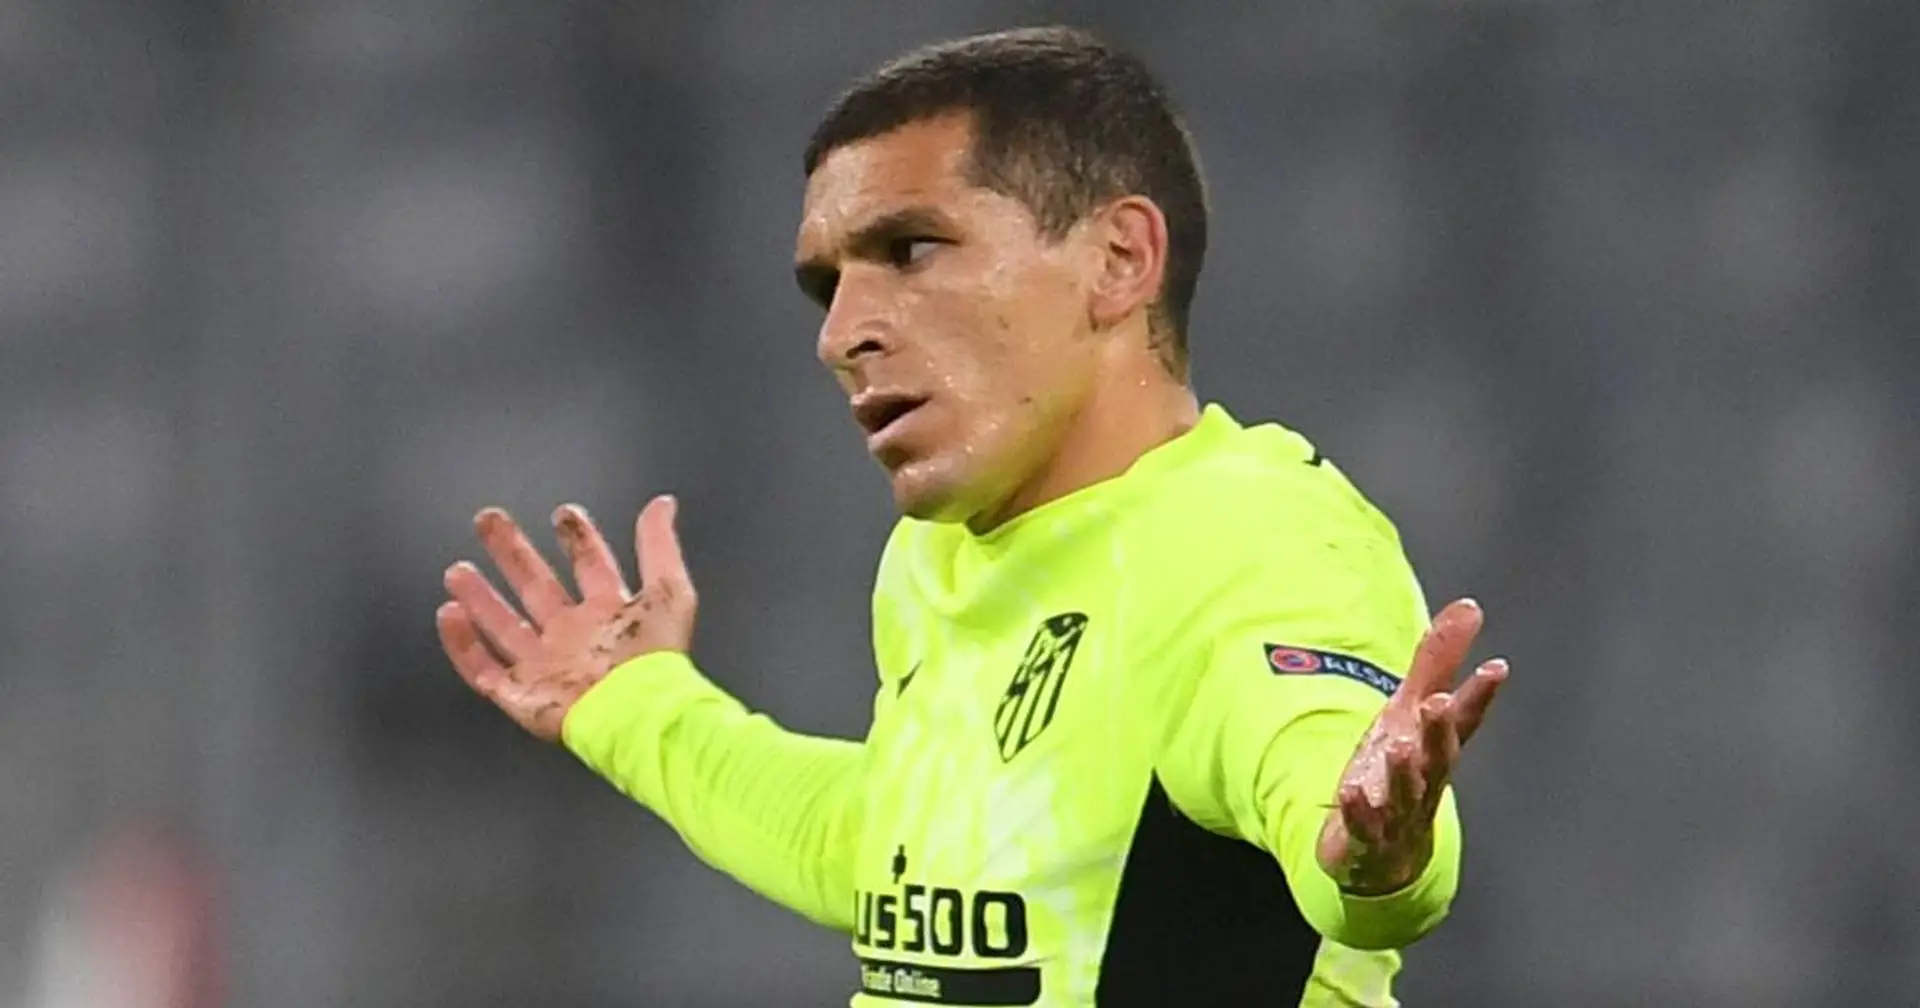 Arsenal ready to cut Torreira's loan short amid interest from Italian clubs (3 stars)